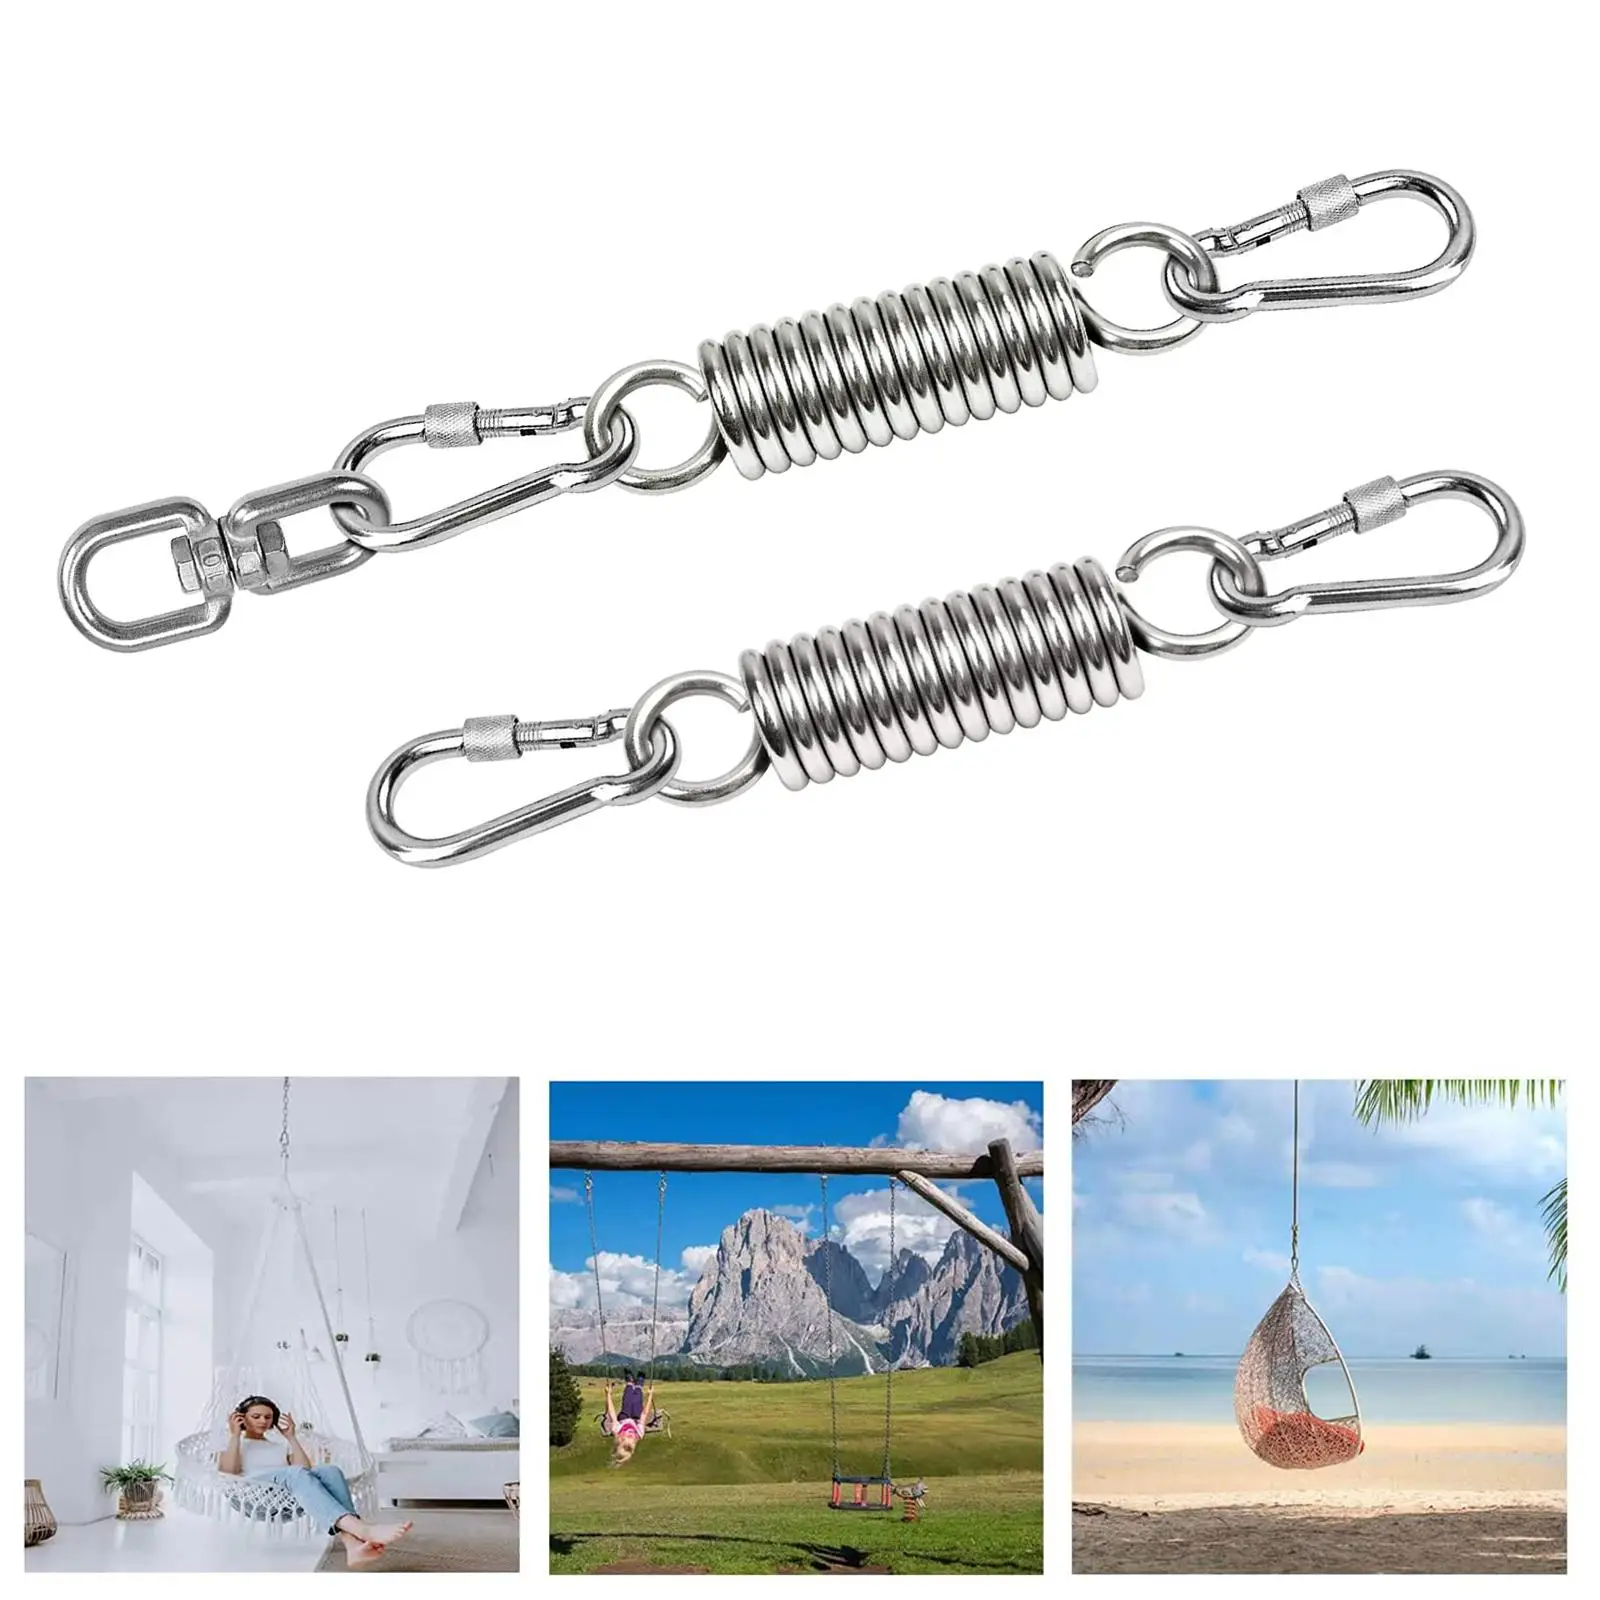 Swing  with Carabiner Hooks,  Spring, Load Capacity Up to 250kg for Hammock, Hanging Chairs,